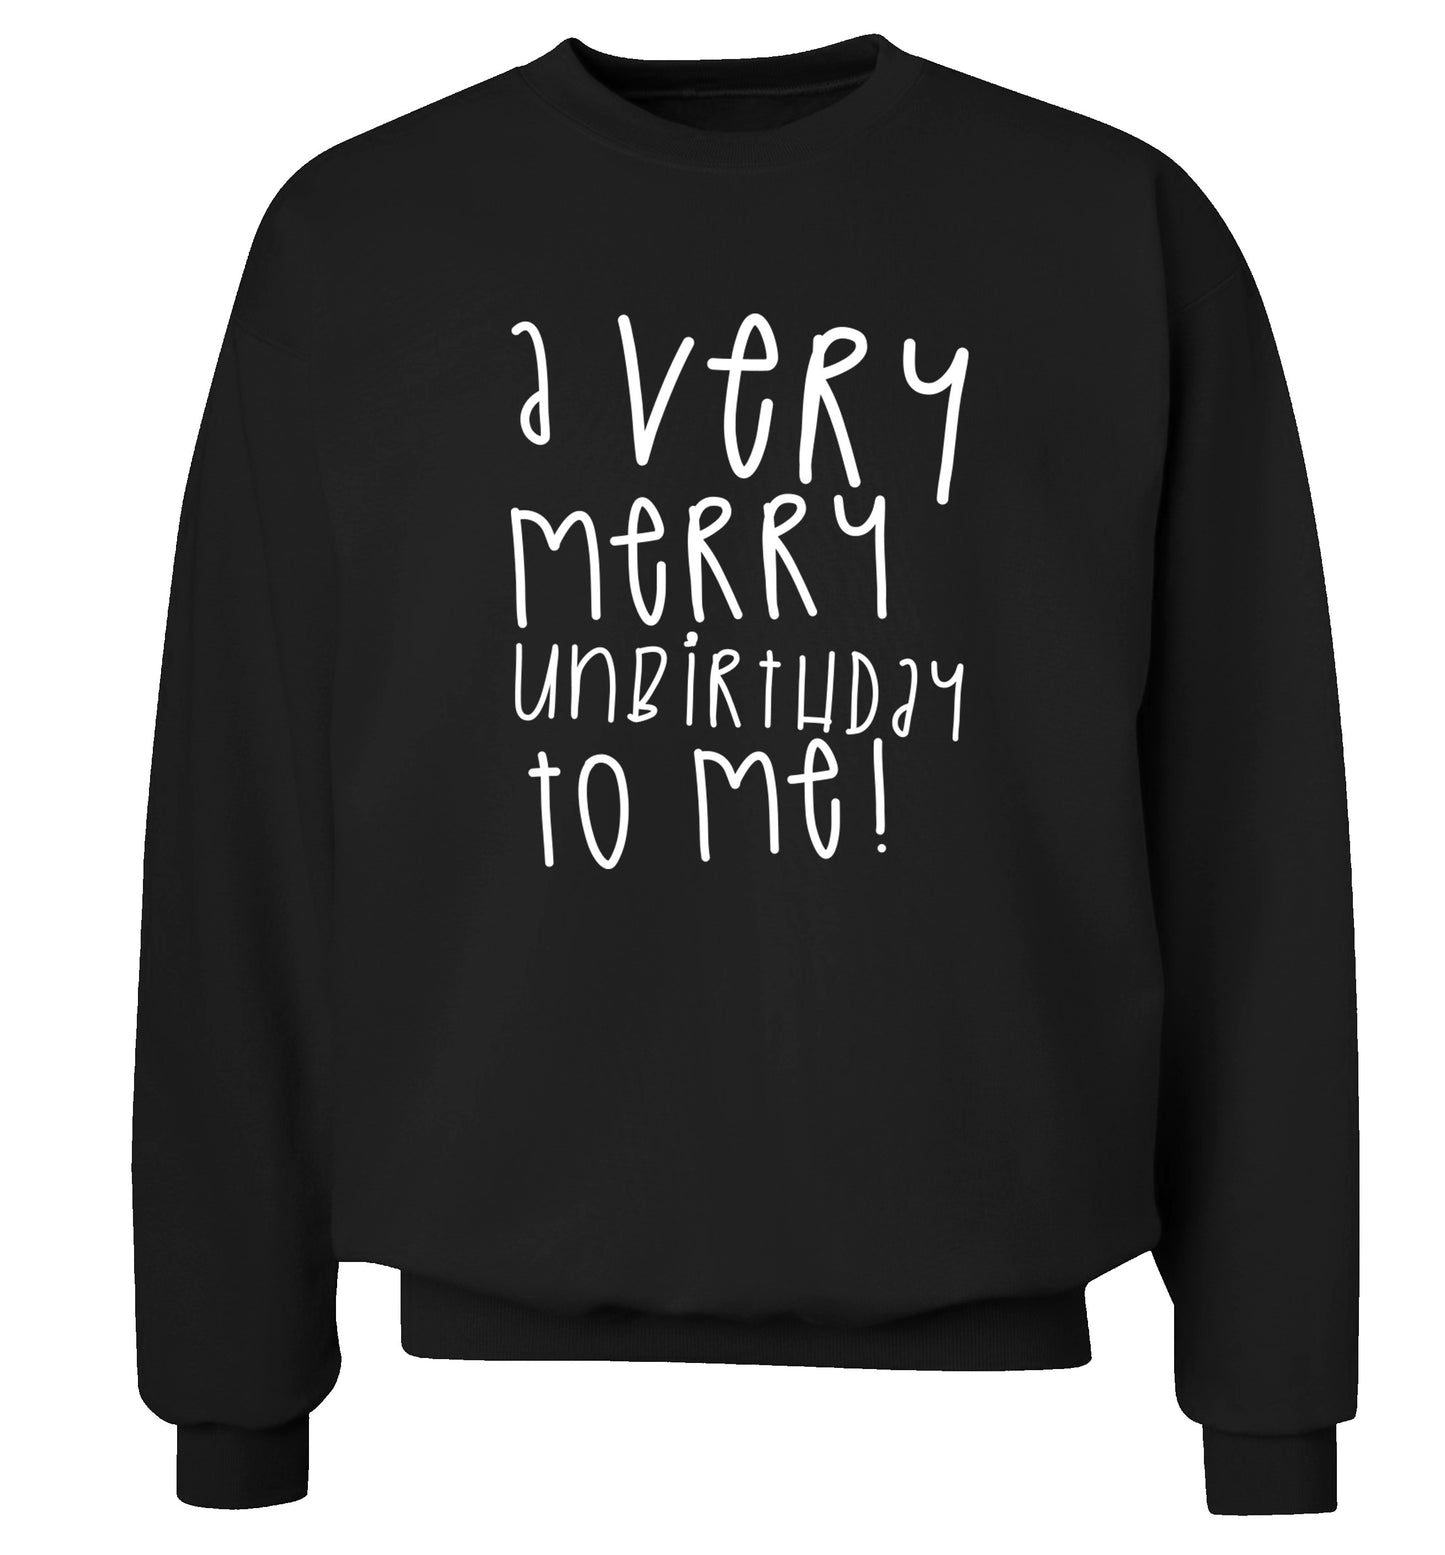 A very merry unbirthday to me! Adult's unisex black Sweater 2XL